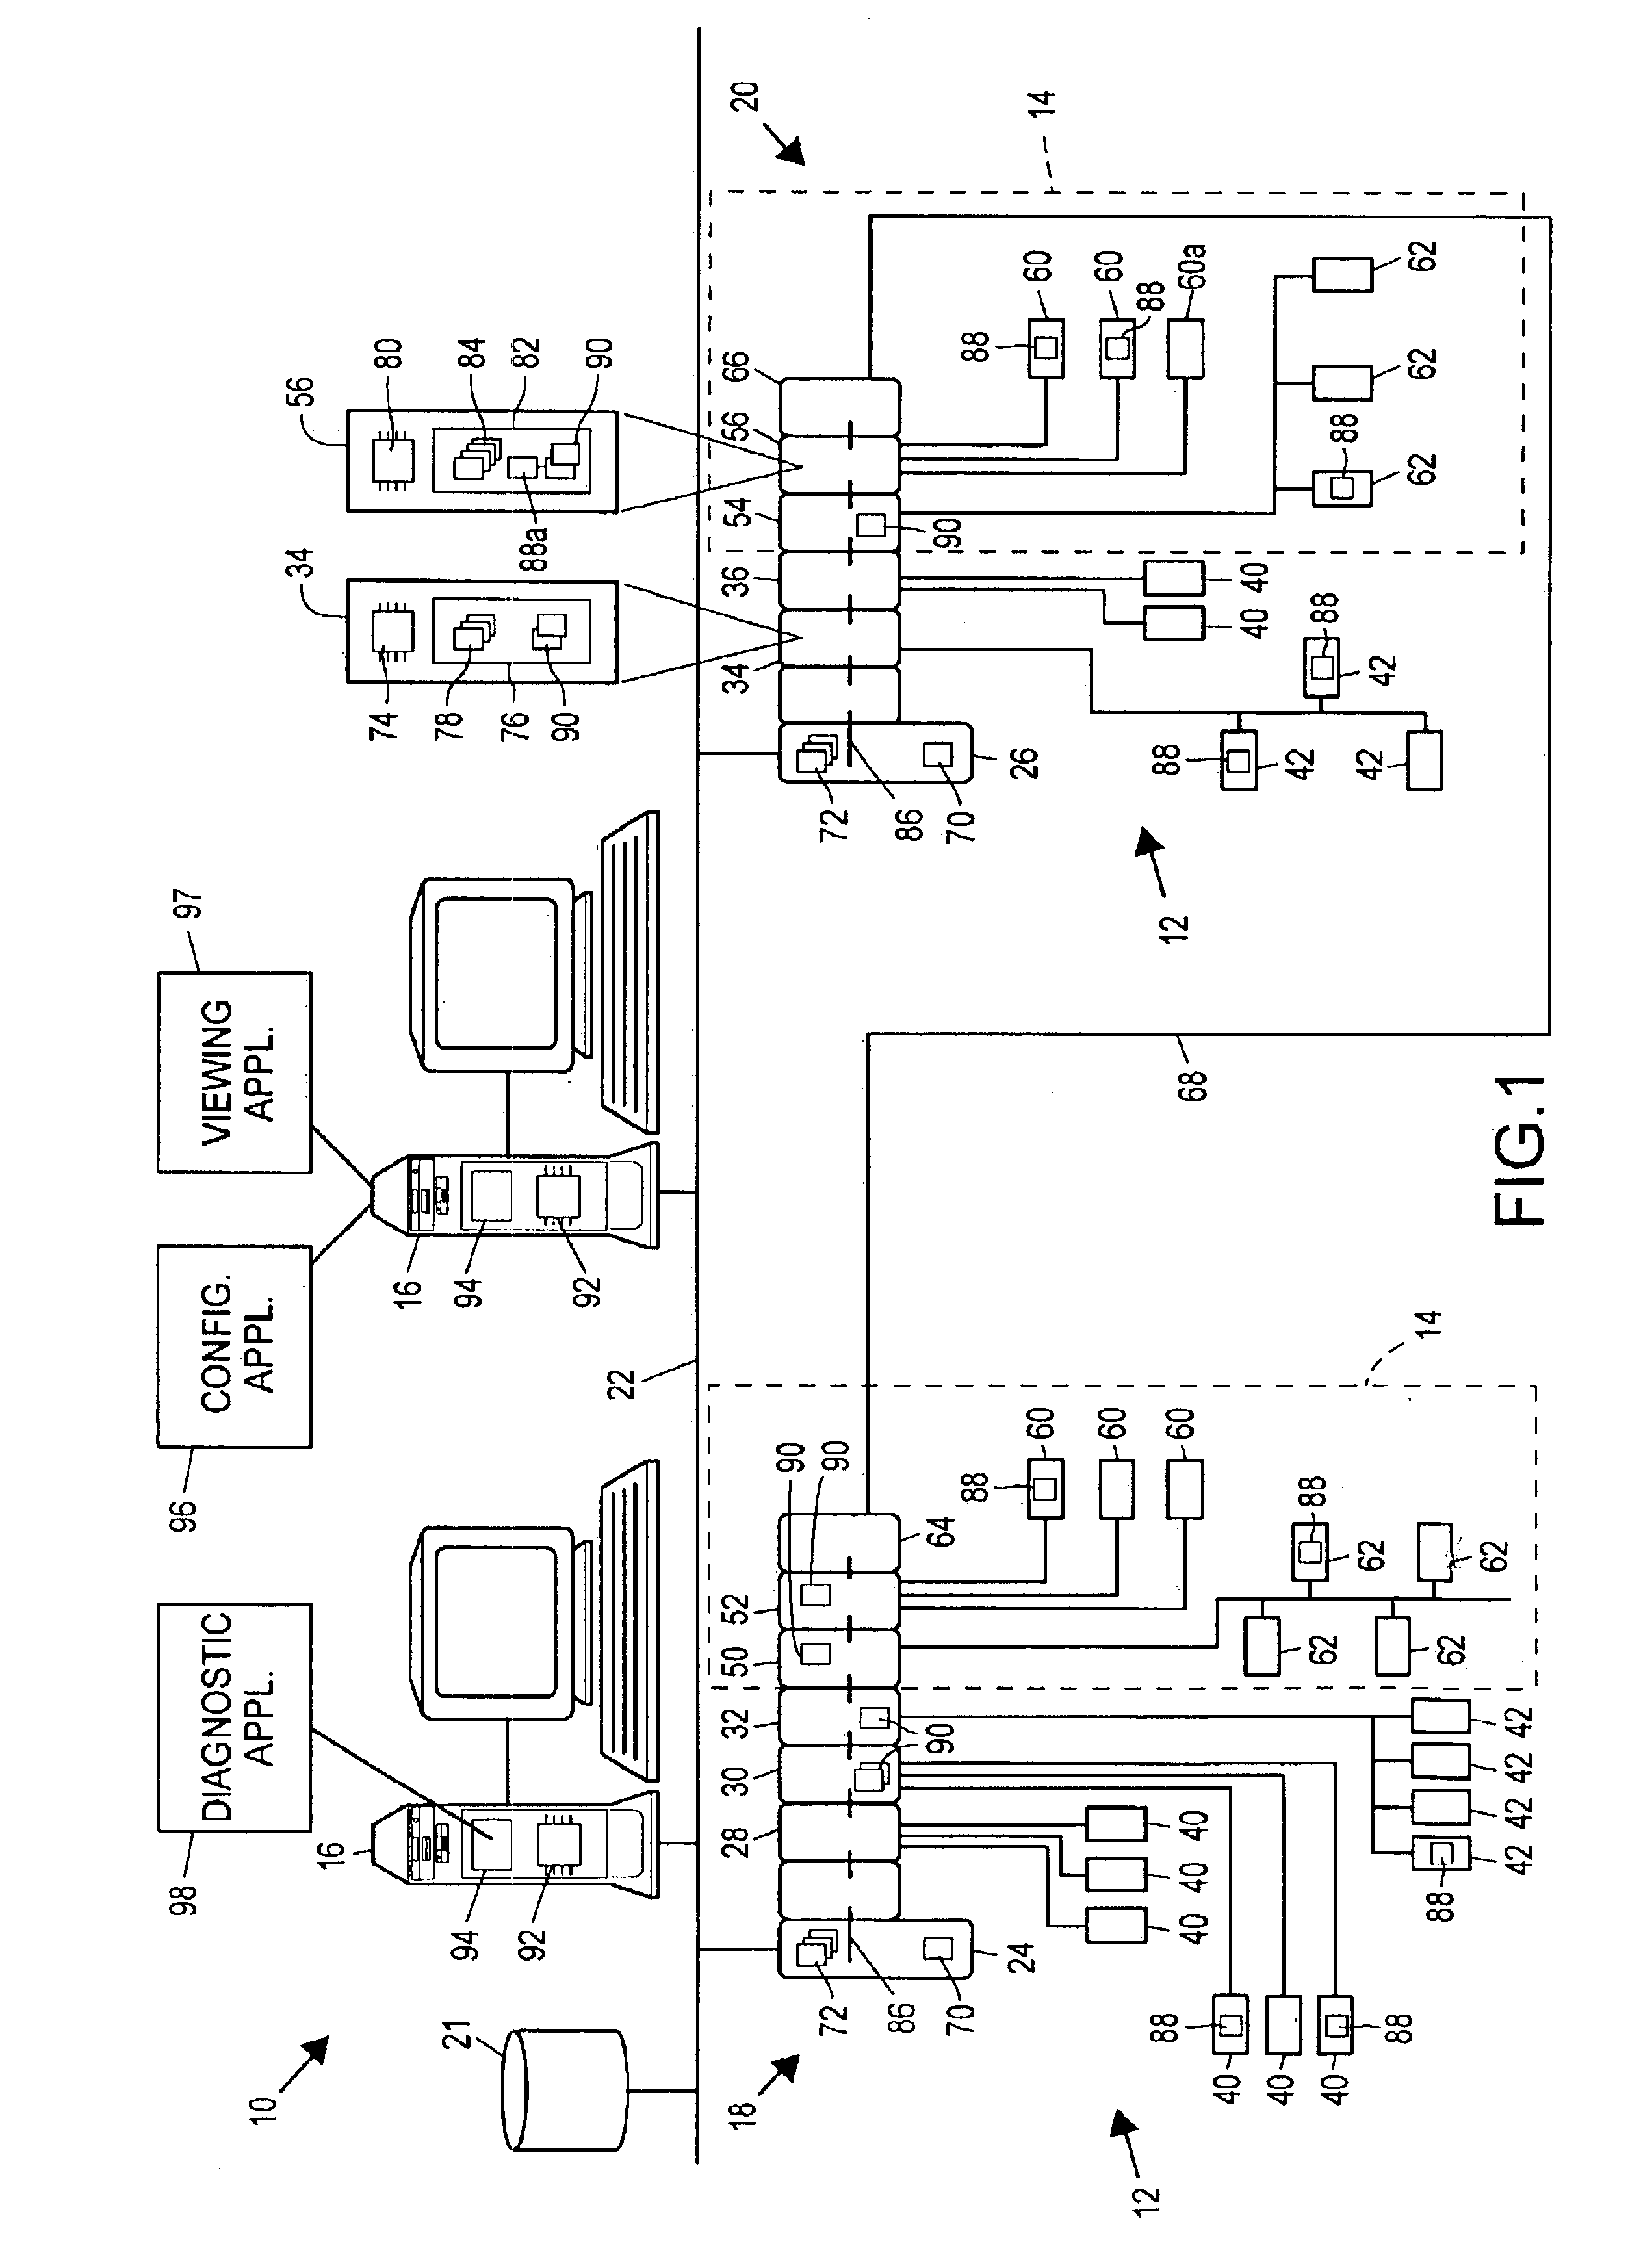 On-line device testing block integrated into a process control/safety system